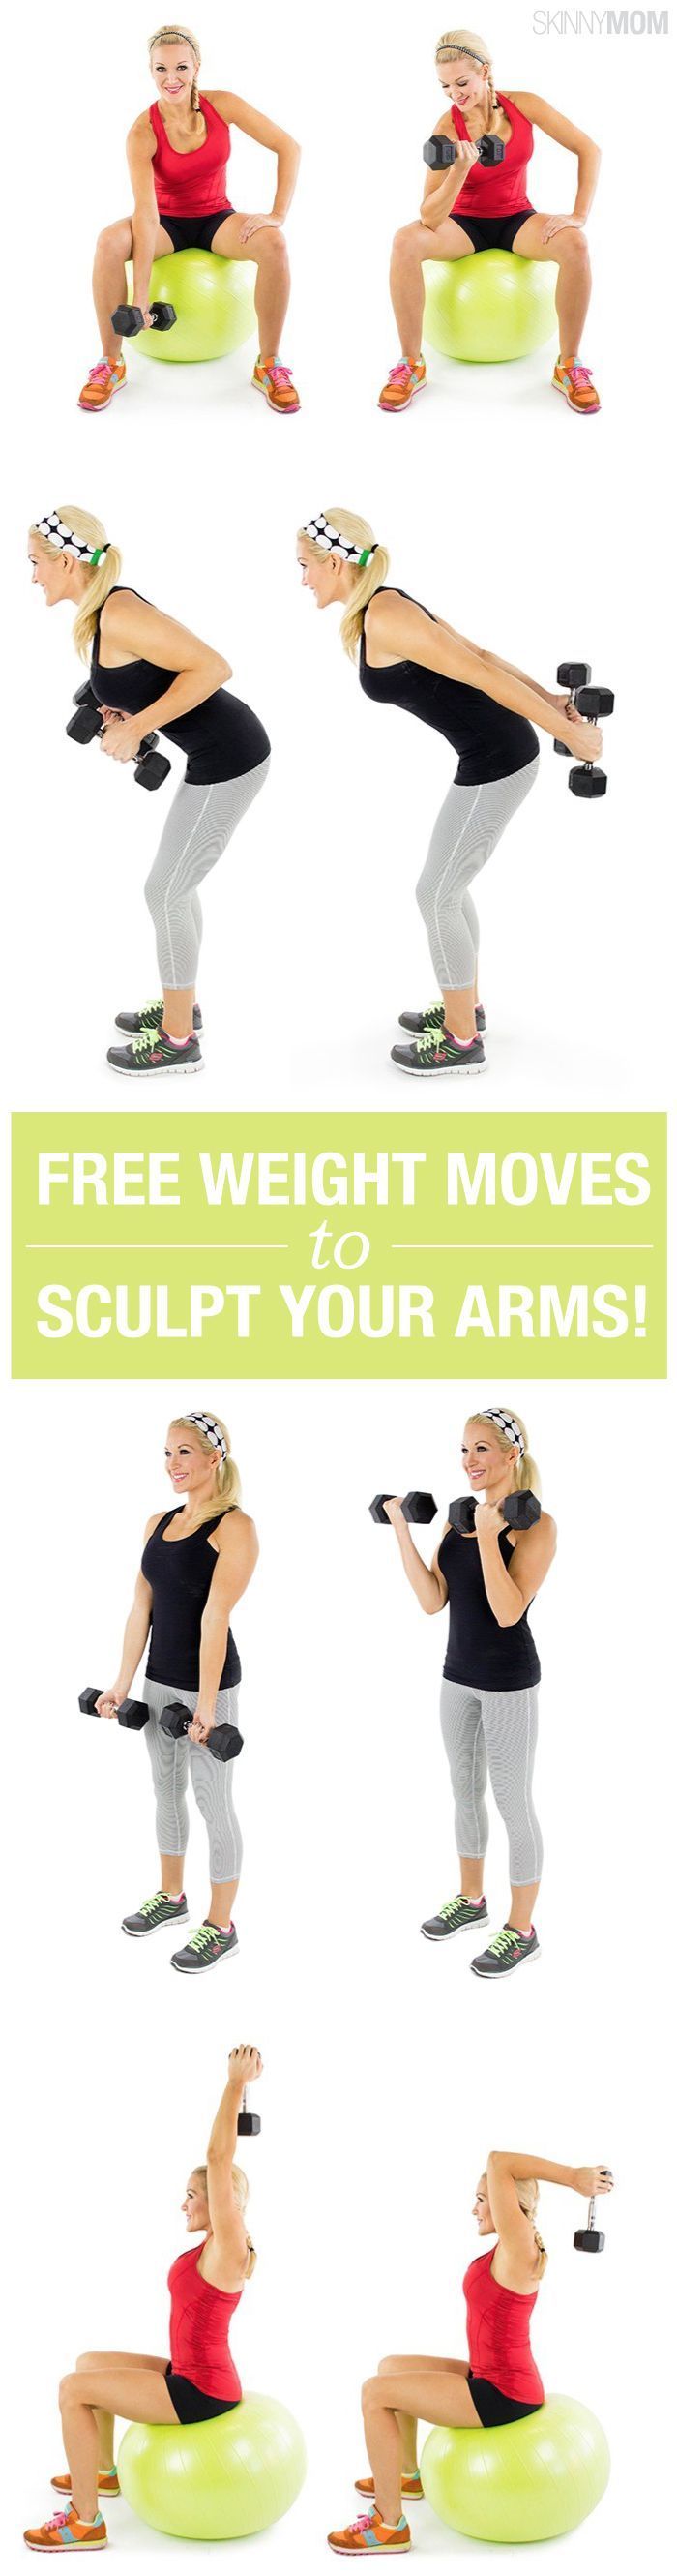 Sculpt your arms with 17 free weight moves. Grab those dumbbells!